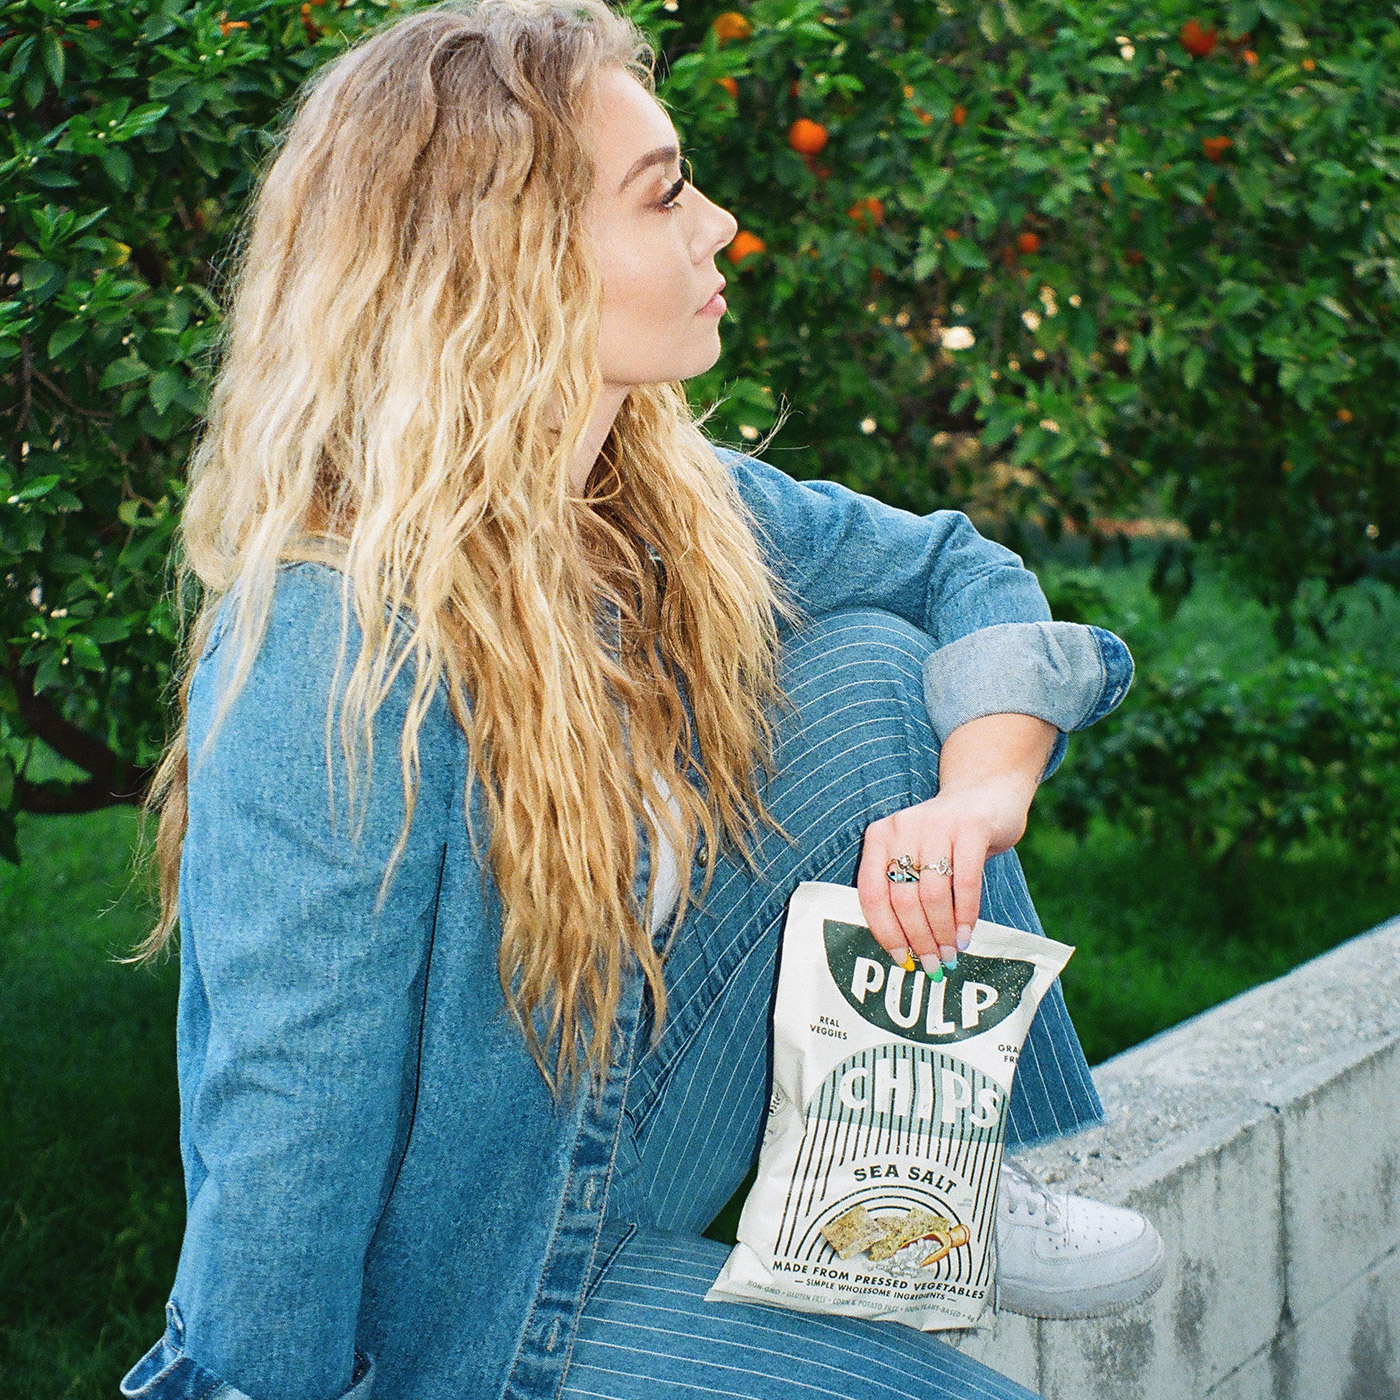 Girl holding bag of Pulp Chips